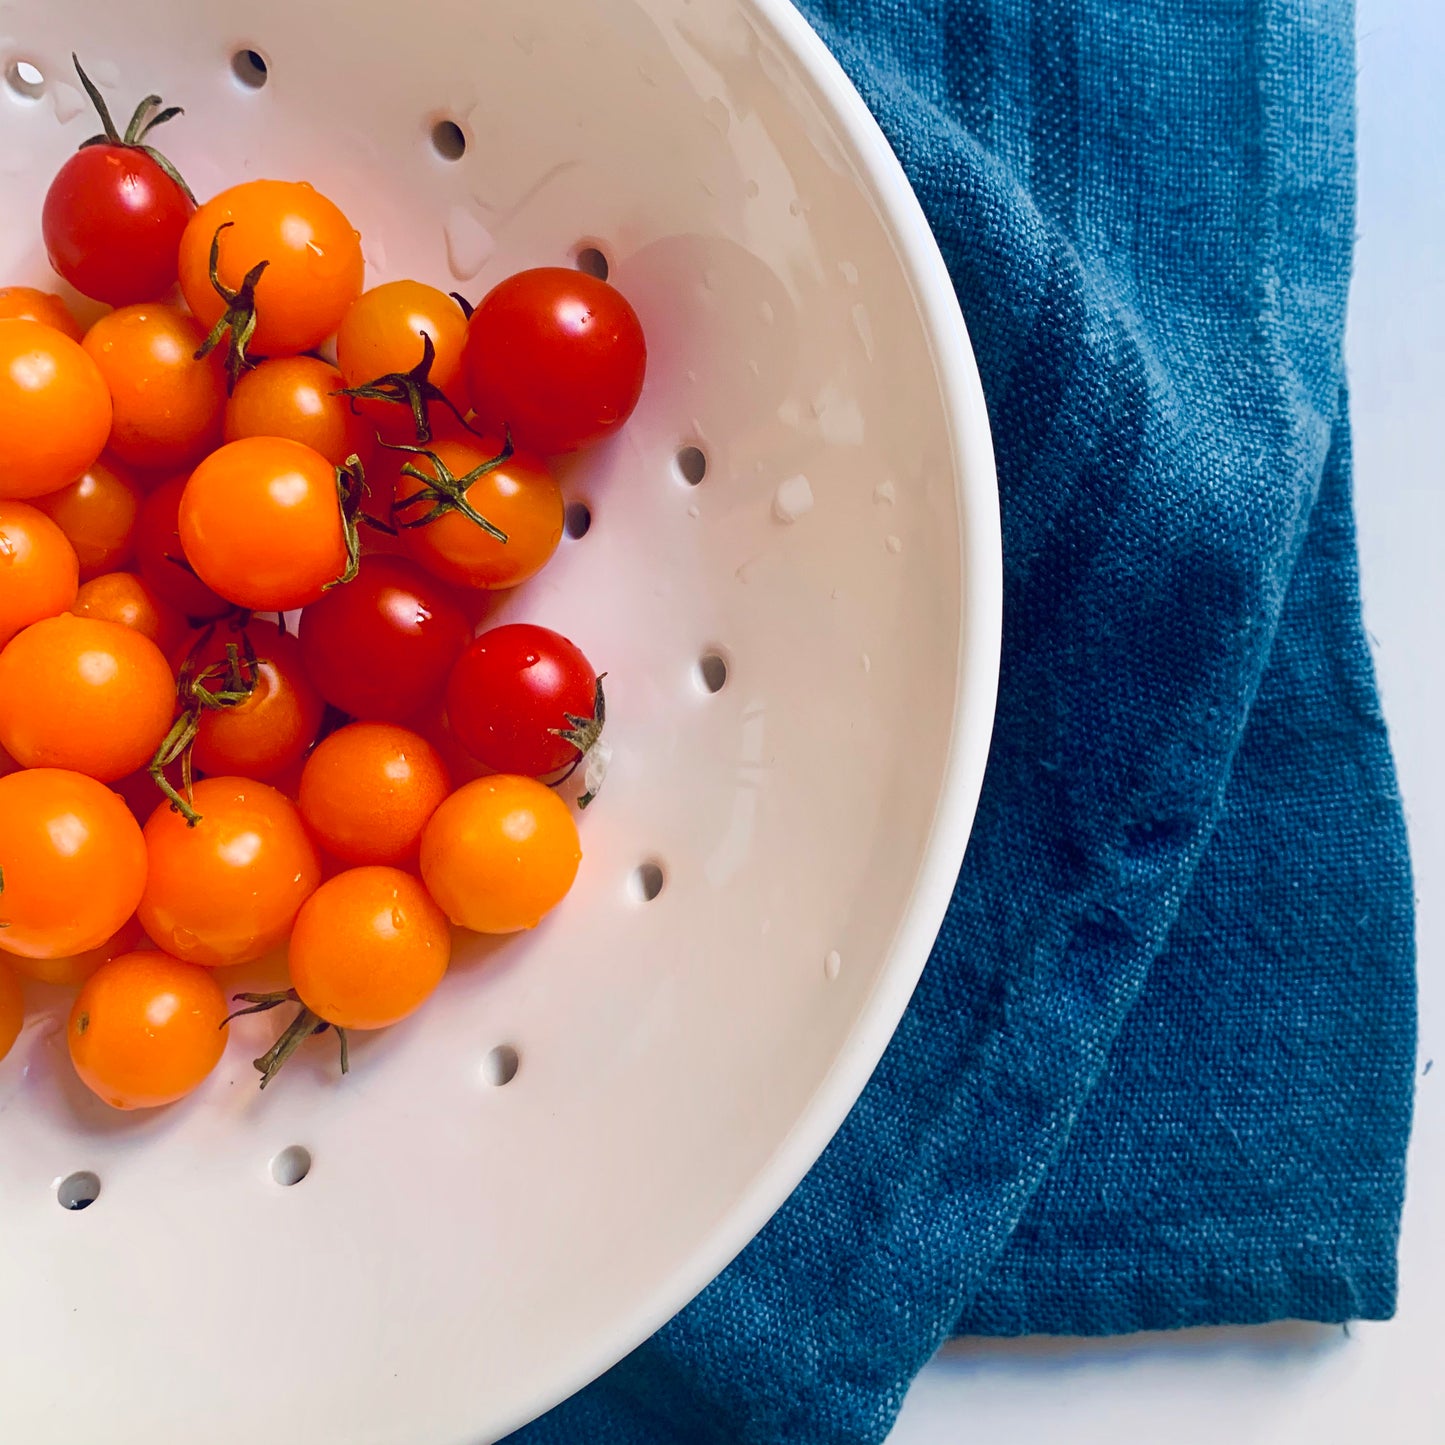 Hudson Grace White Ceramic Berry Bowl with cherry tomatoes and a blue towel